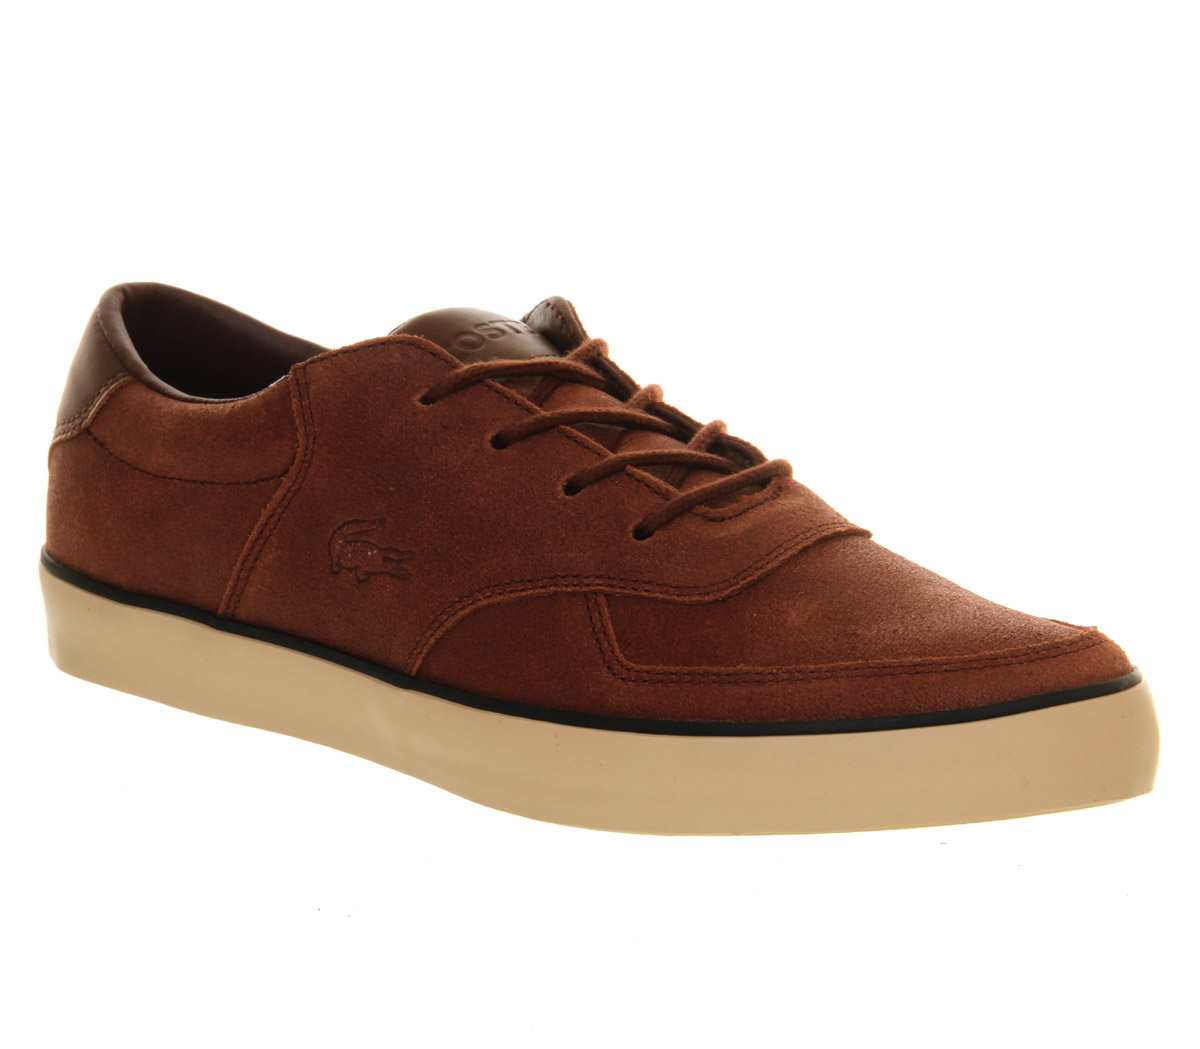 LacosteGlendonBrown Leather Suede